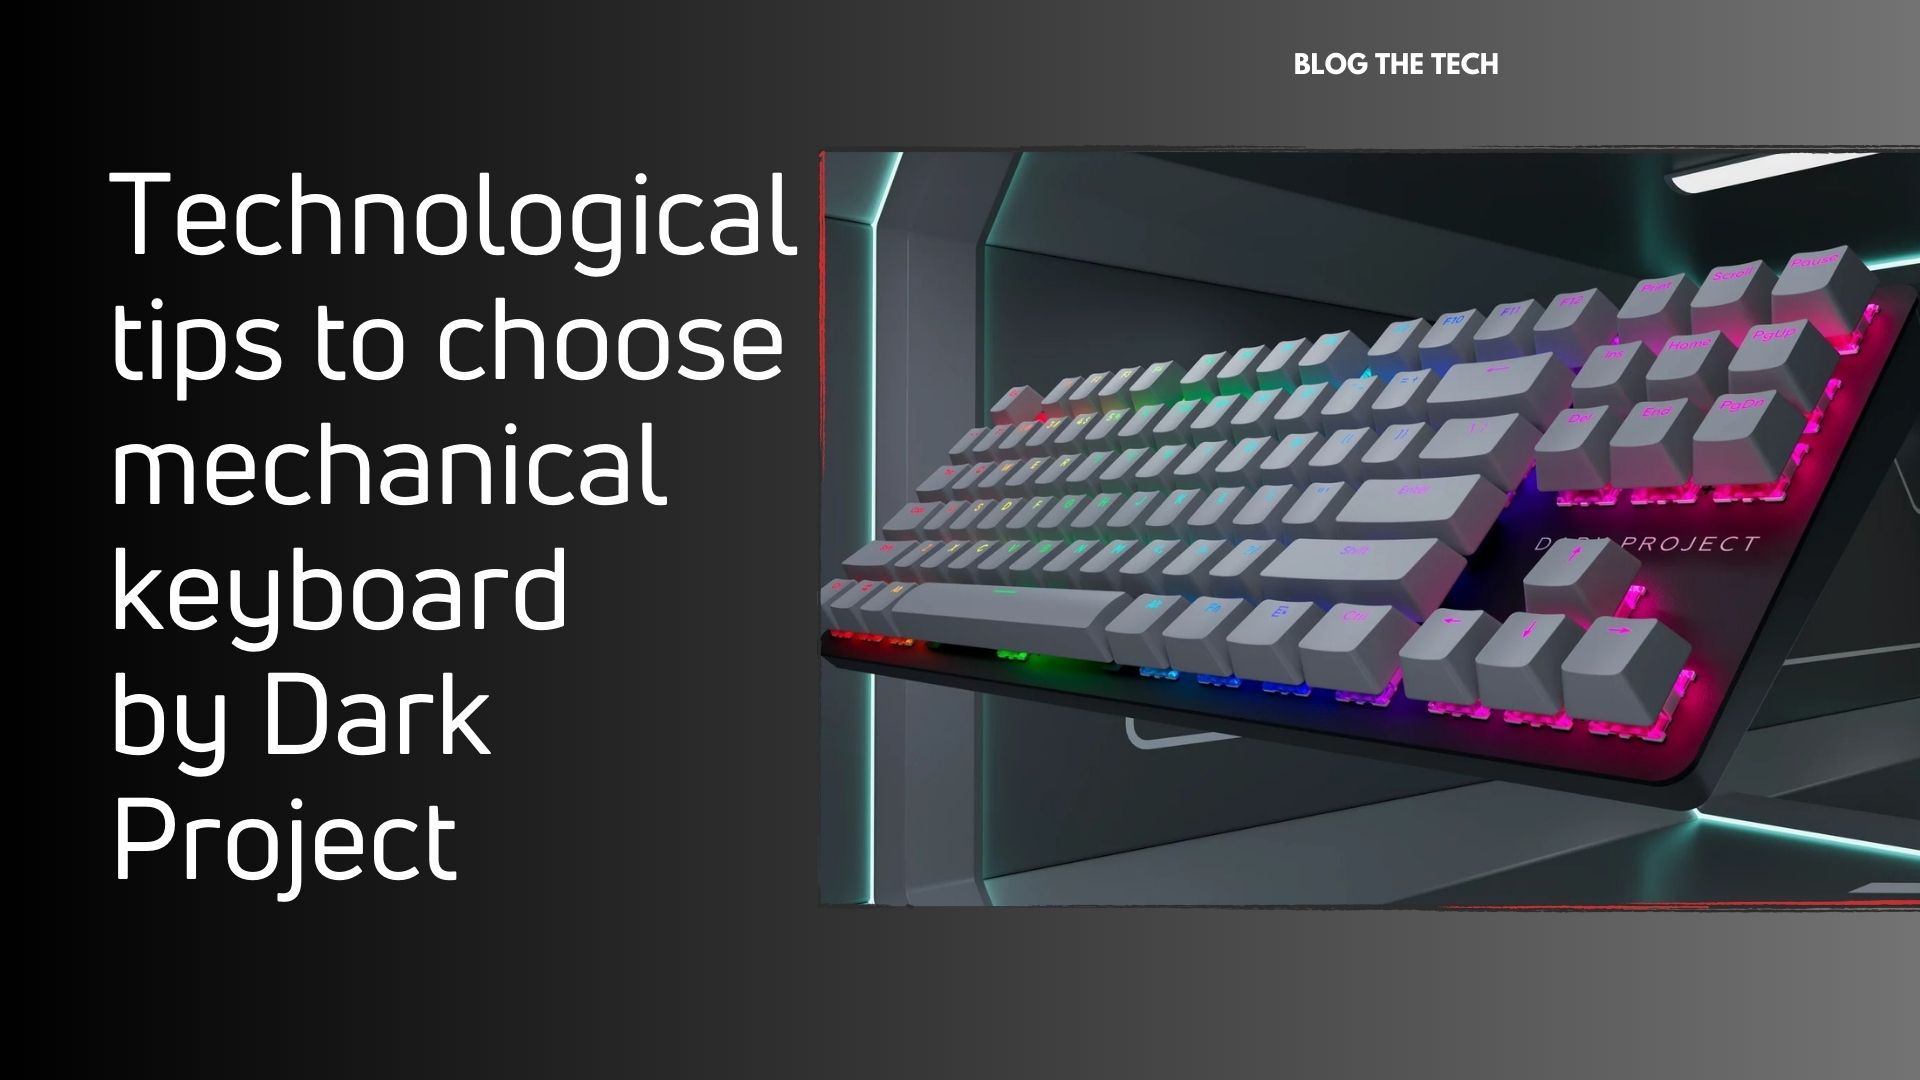 Technological tips to choose mechanical keyboard by Dark Project